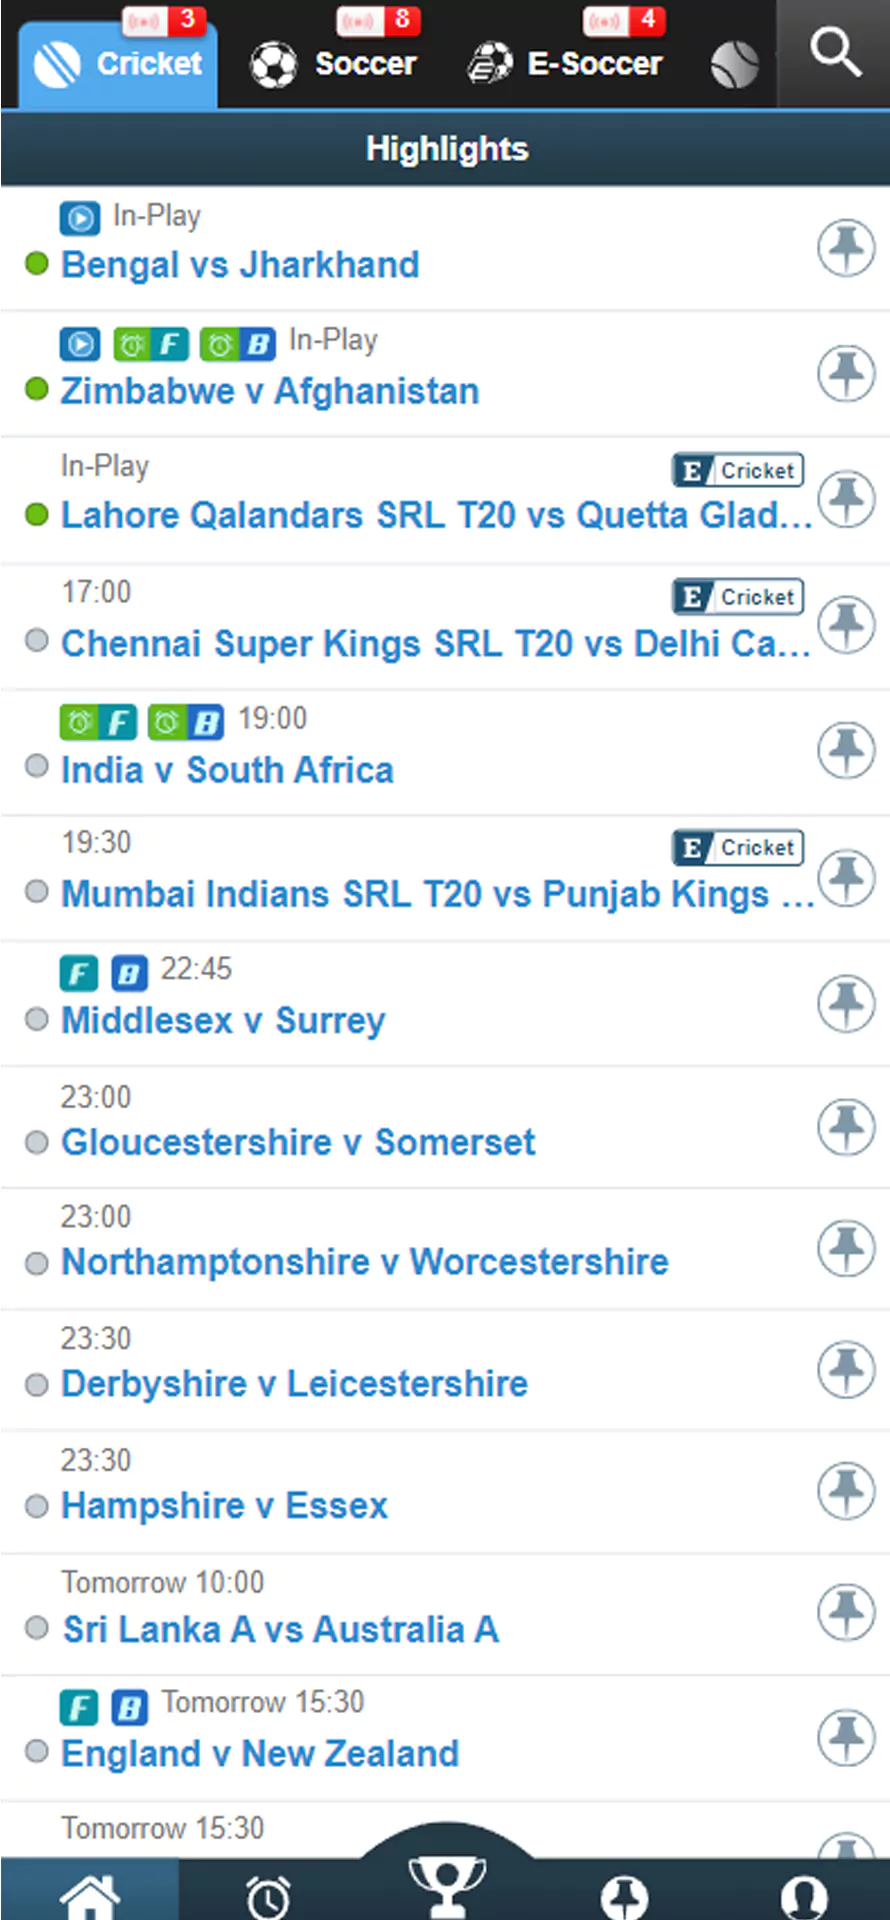 Cricket betting section in the Crickex app.